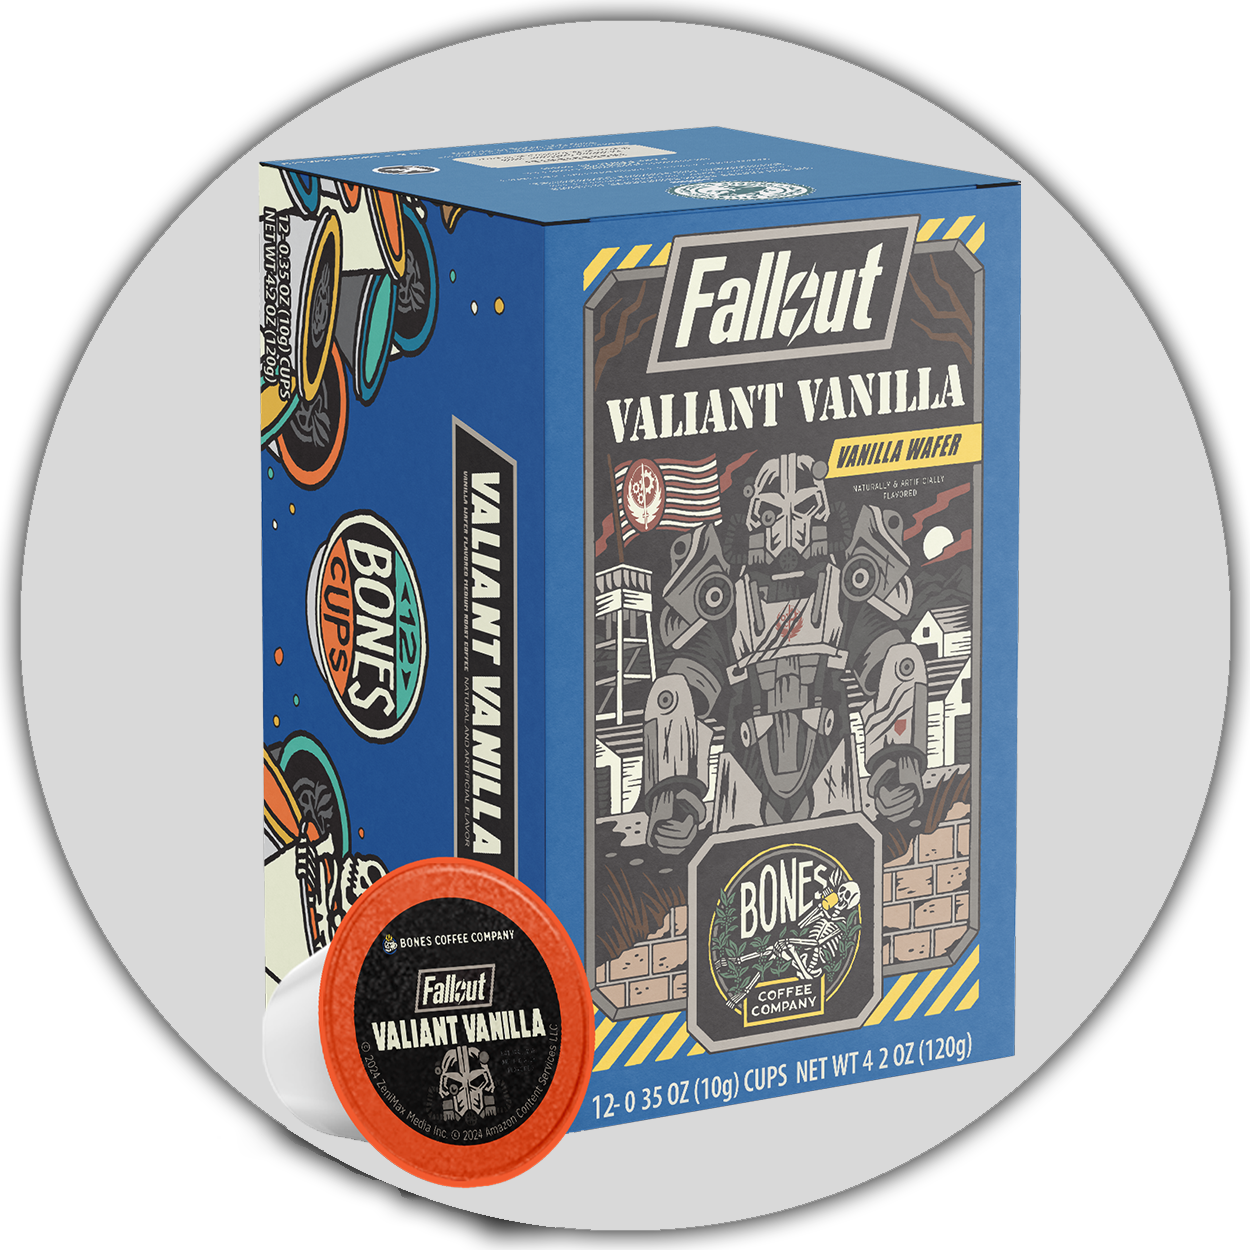 A box of Bones Cups flavored coffee inspired by Fallout named Valiant Vanilla. Its flavor is vanilla wafer. On the art is Maximus in a power suit from the Fallout show. A light gray circle is behind it.